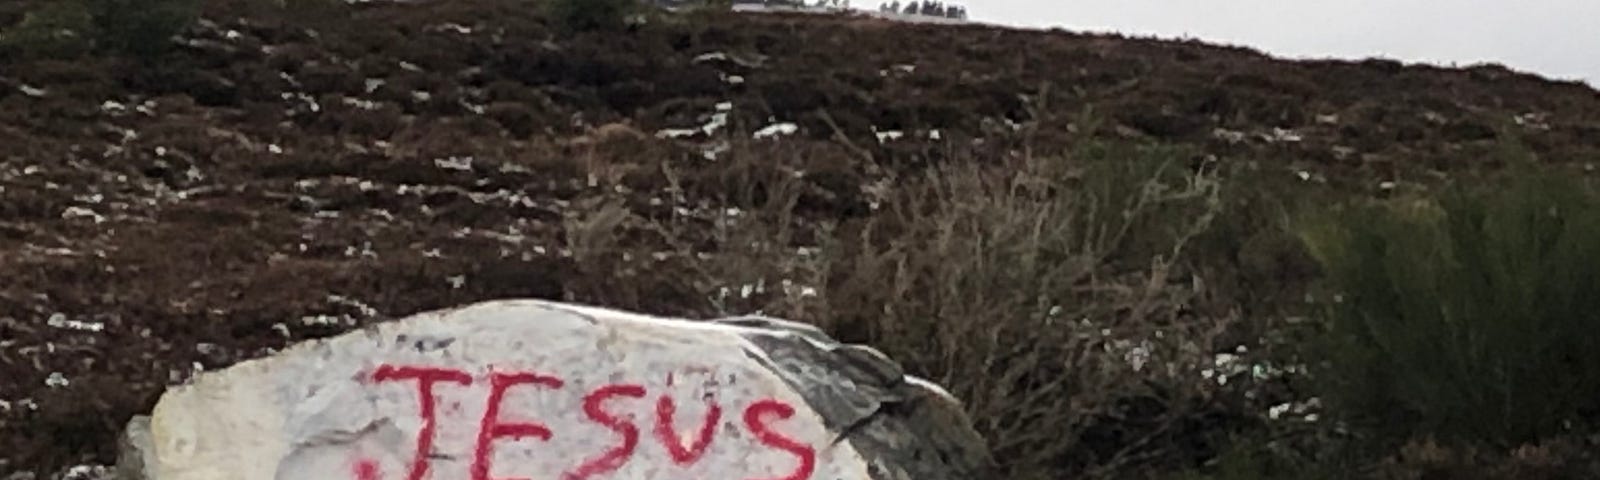 A large boulder on moorland, with one side painted white and the words “Jesus Saves” spray painted in red